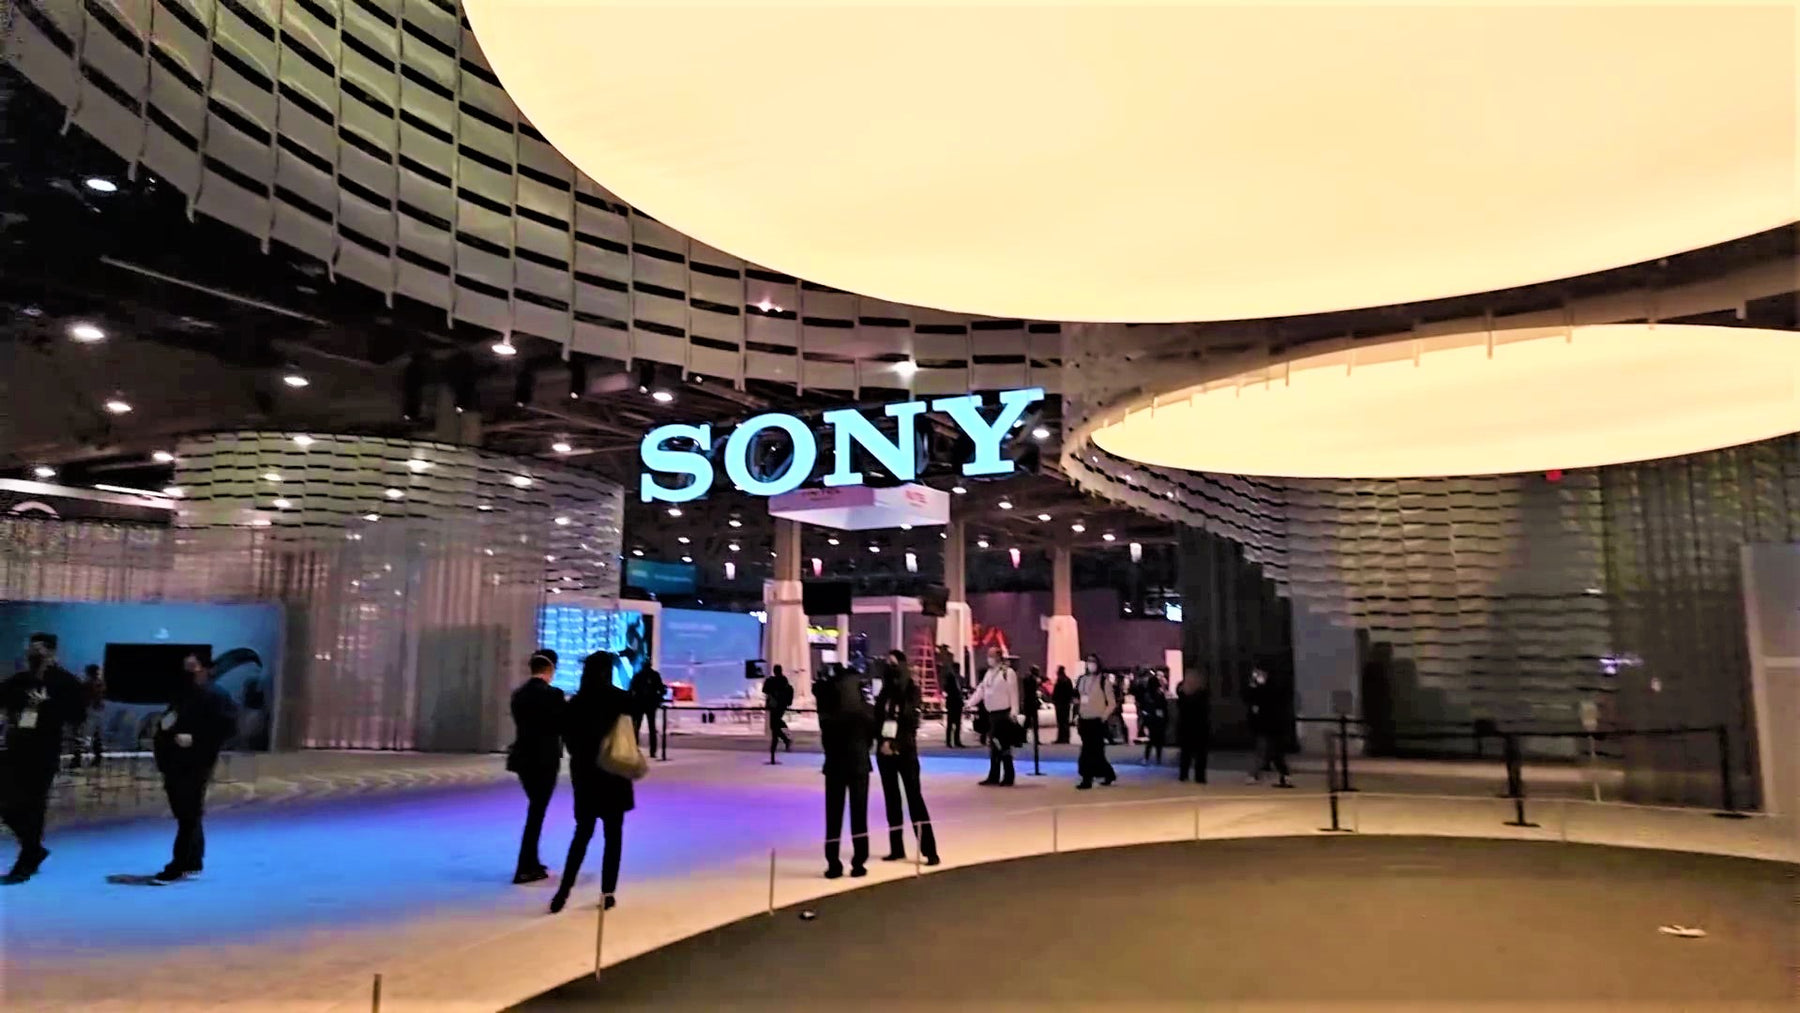 SONXPLUS WAS AT CES 2022 SONY 2022 news.